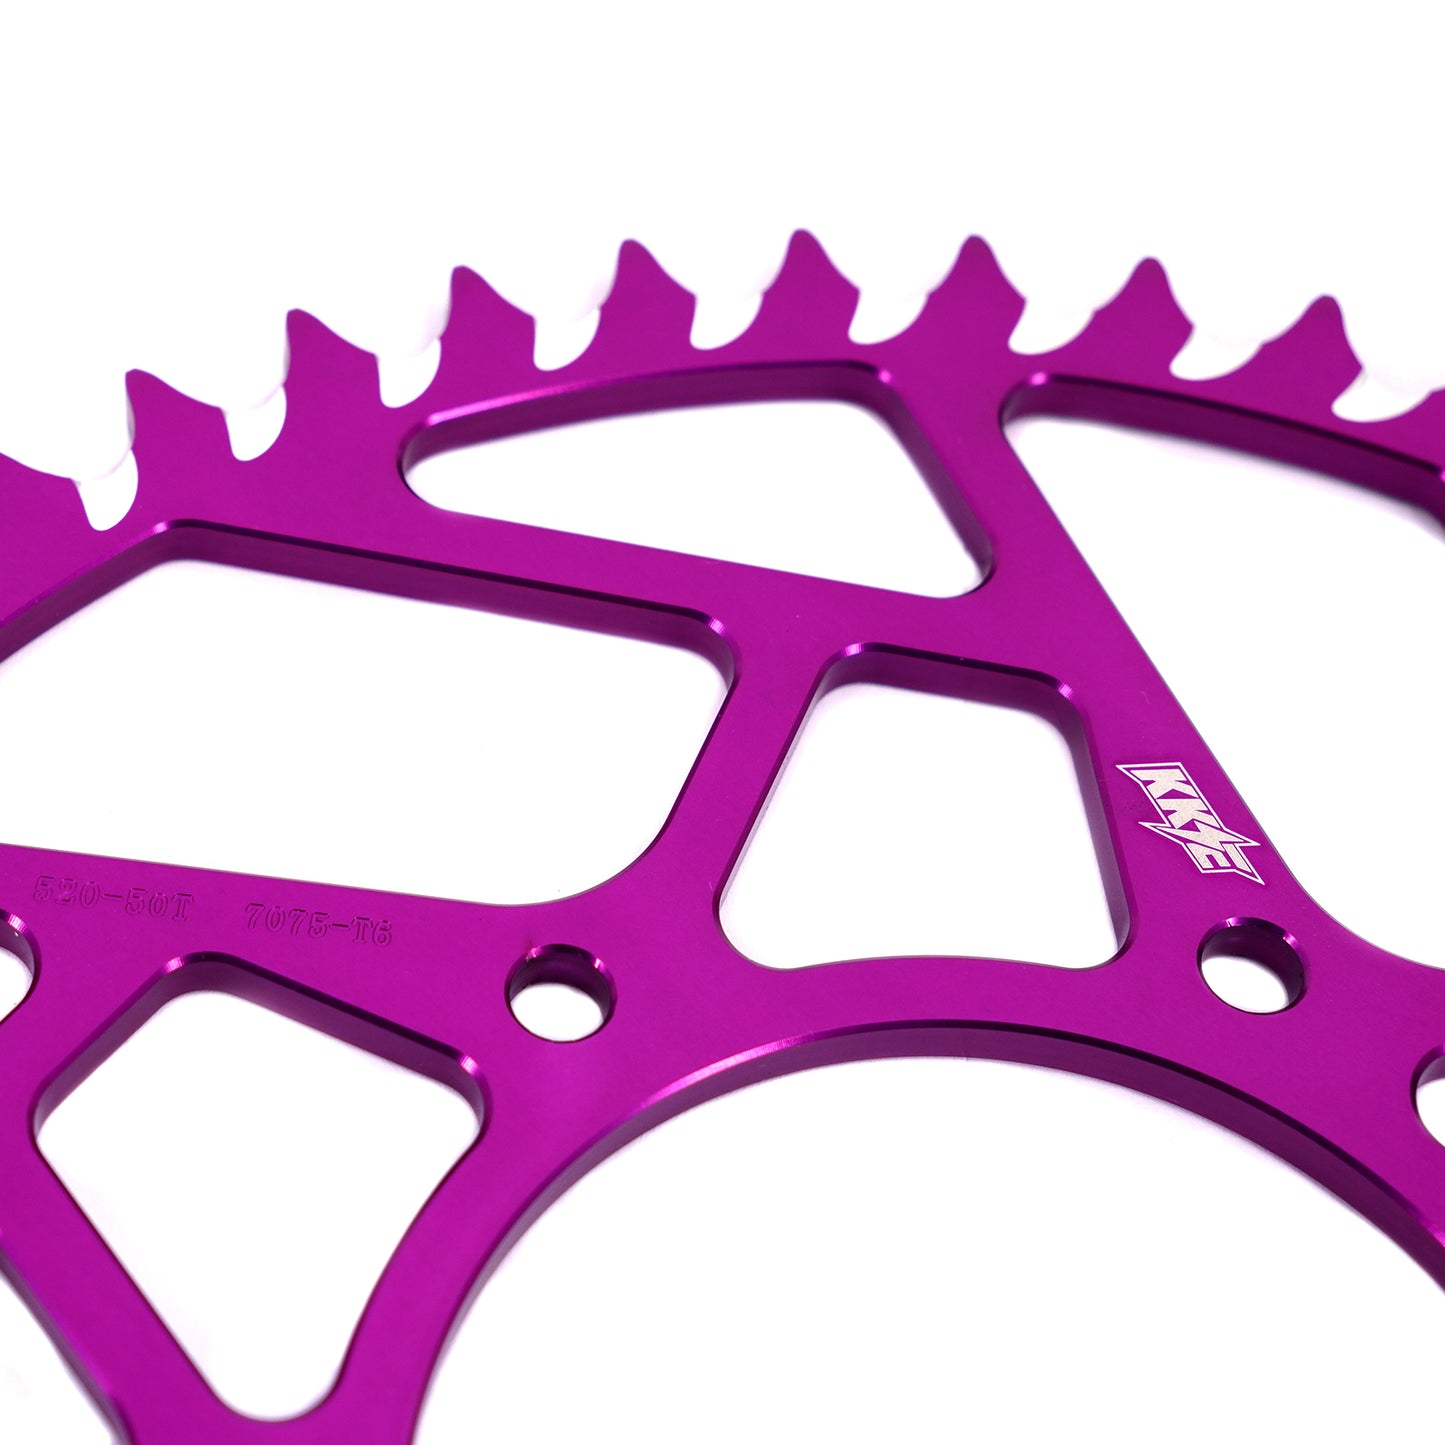 KKE OEM Size Rear 50T Aluminum Sprocket For SURRON Ultra Bee Electric Bike Various Colors Available